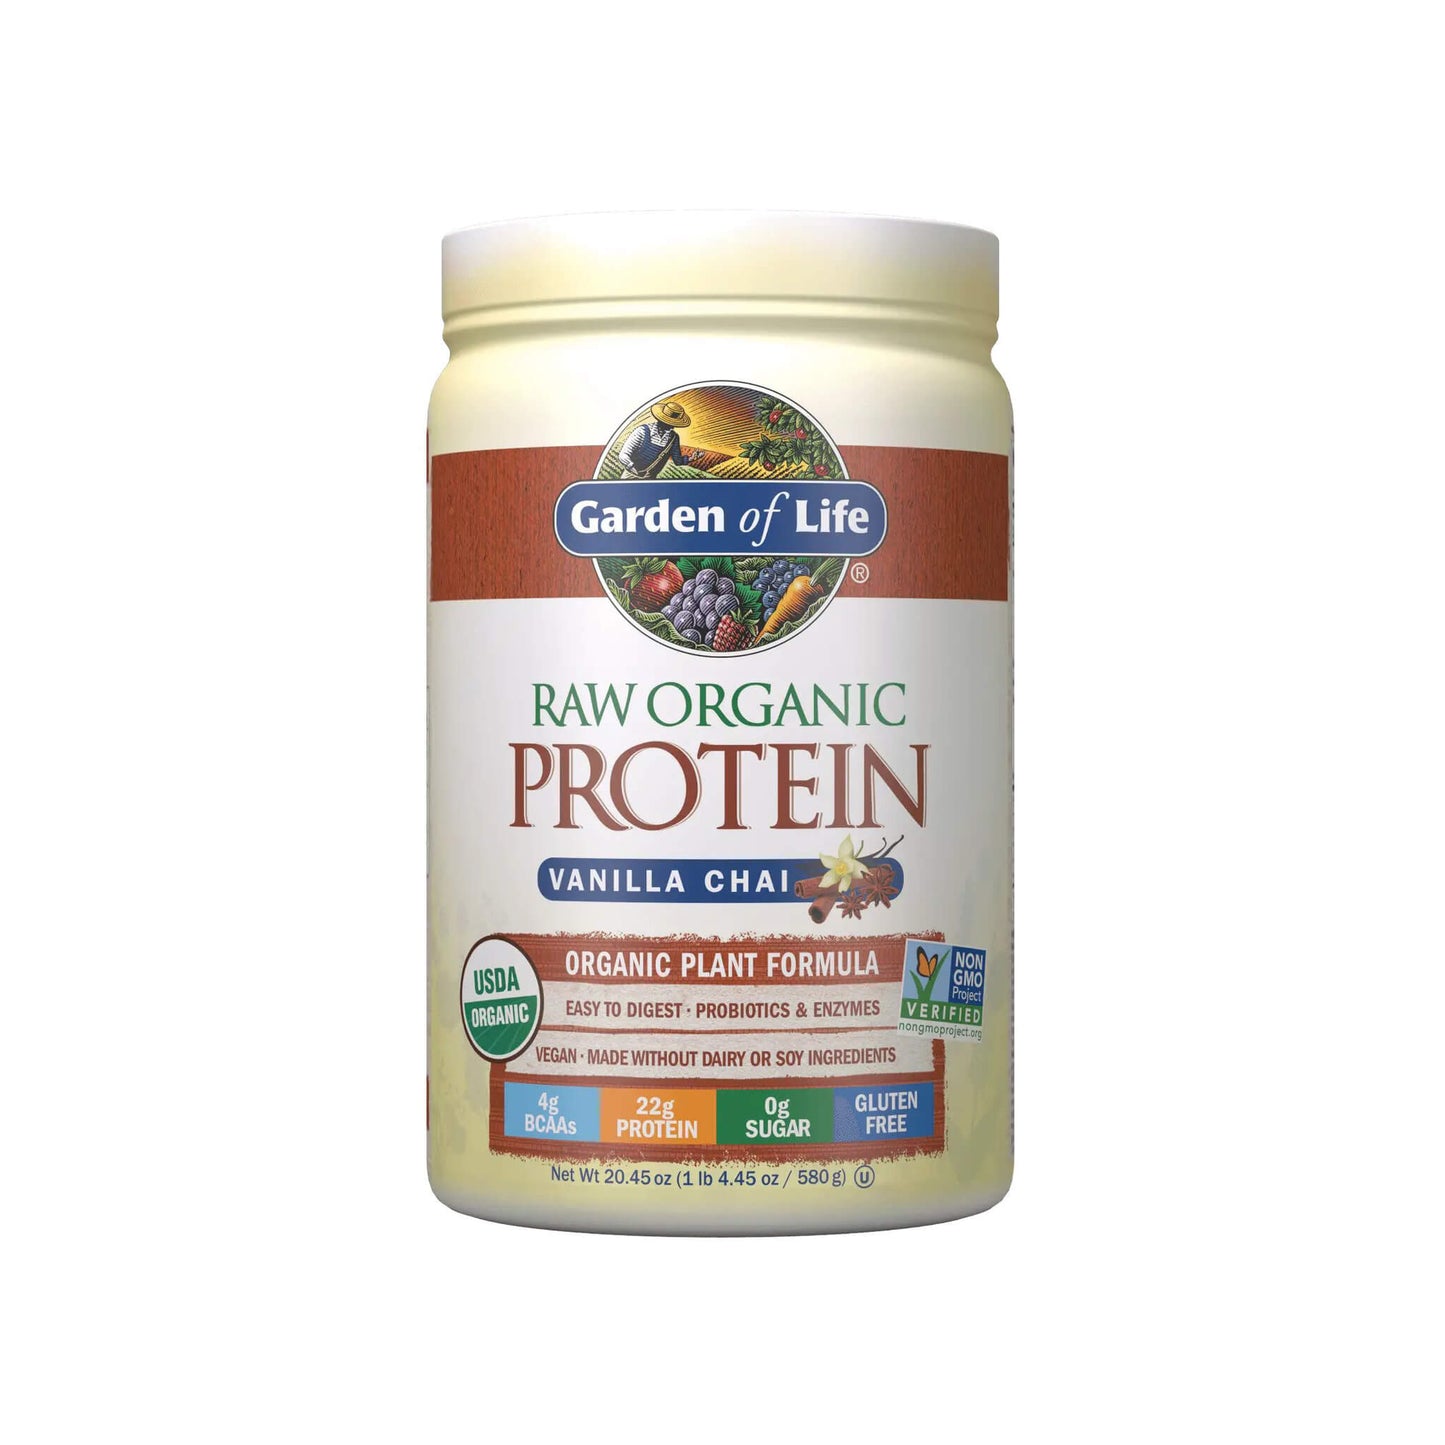 Garden of Life Raw Organic Protein, Plant-Based